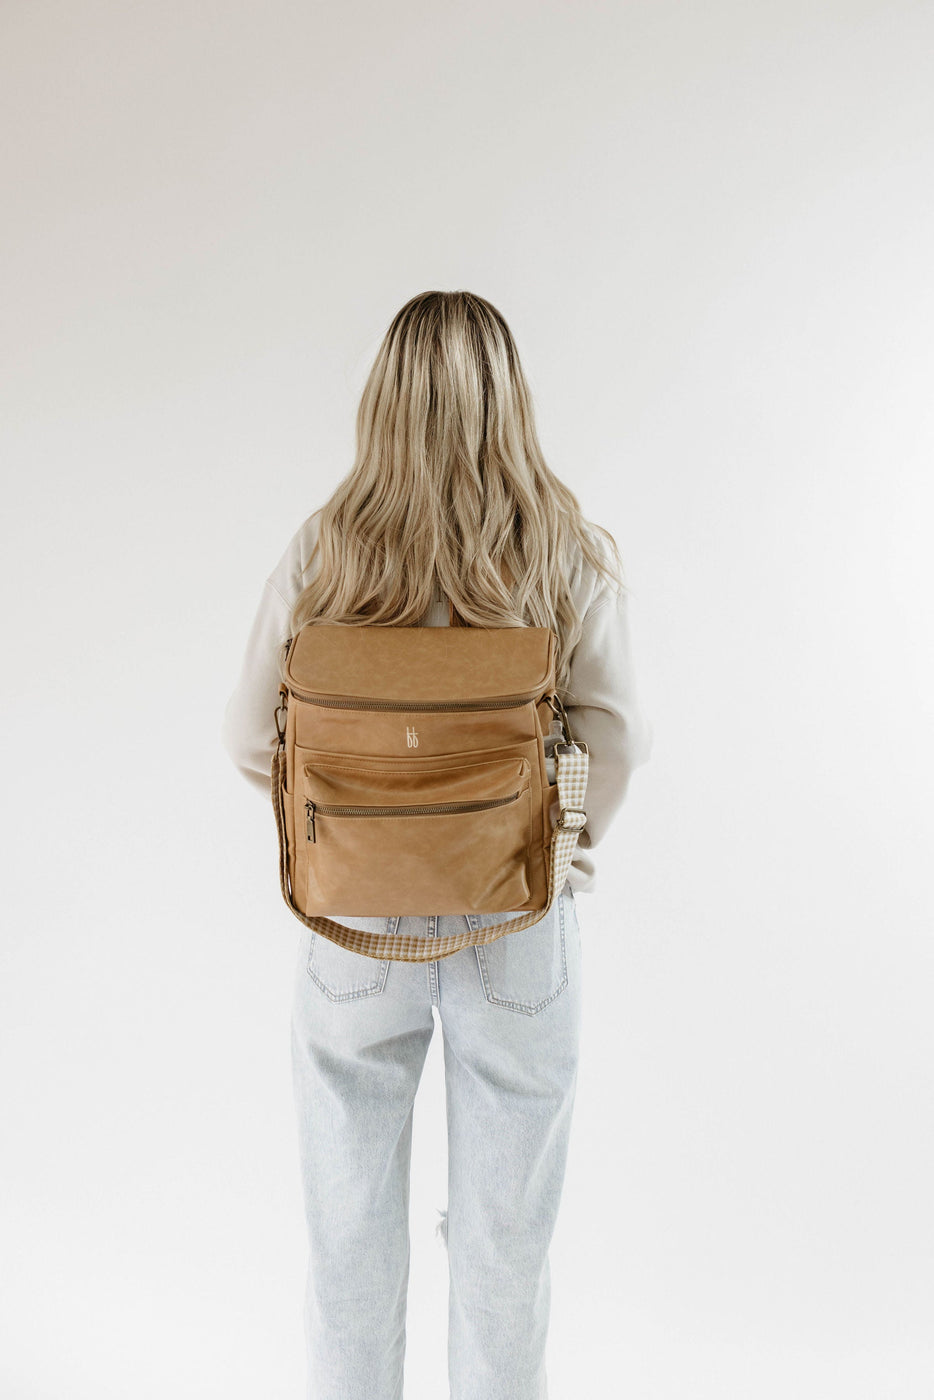 a woman with a brown backpack